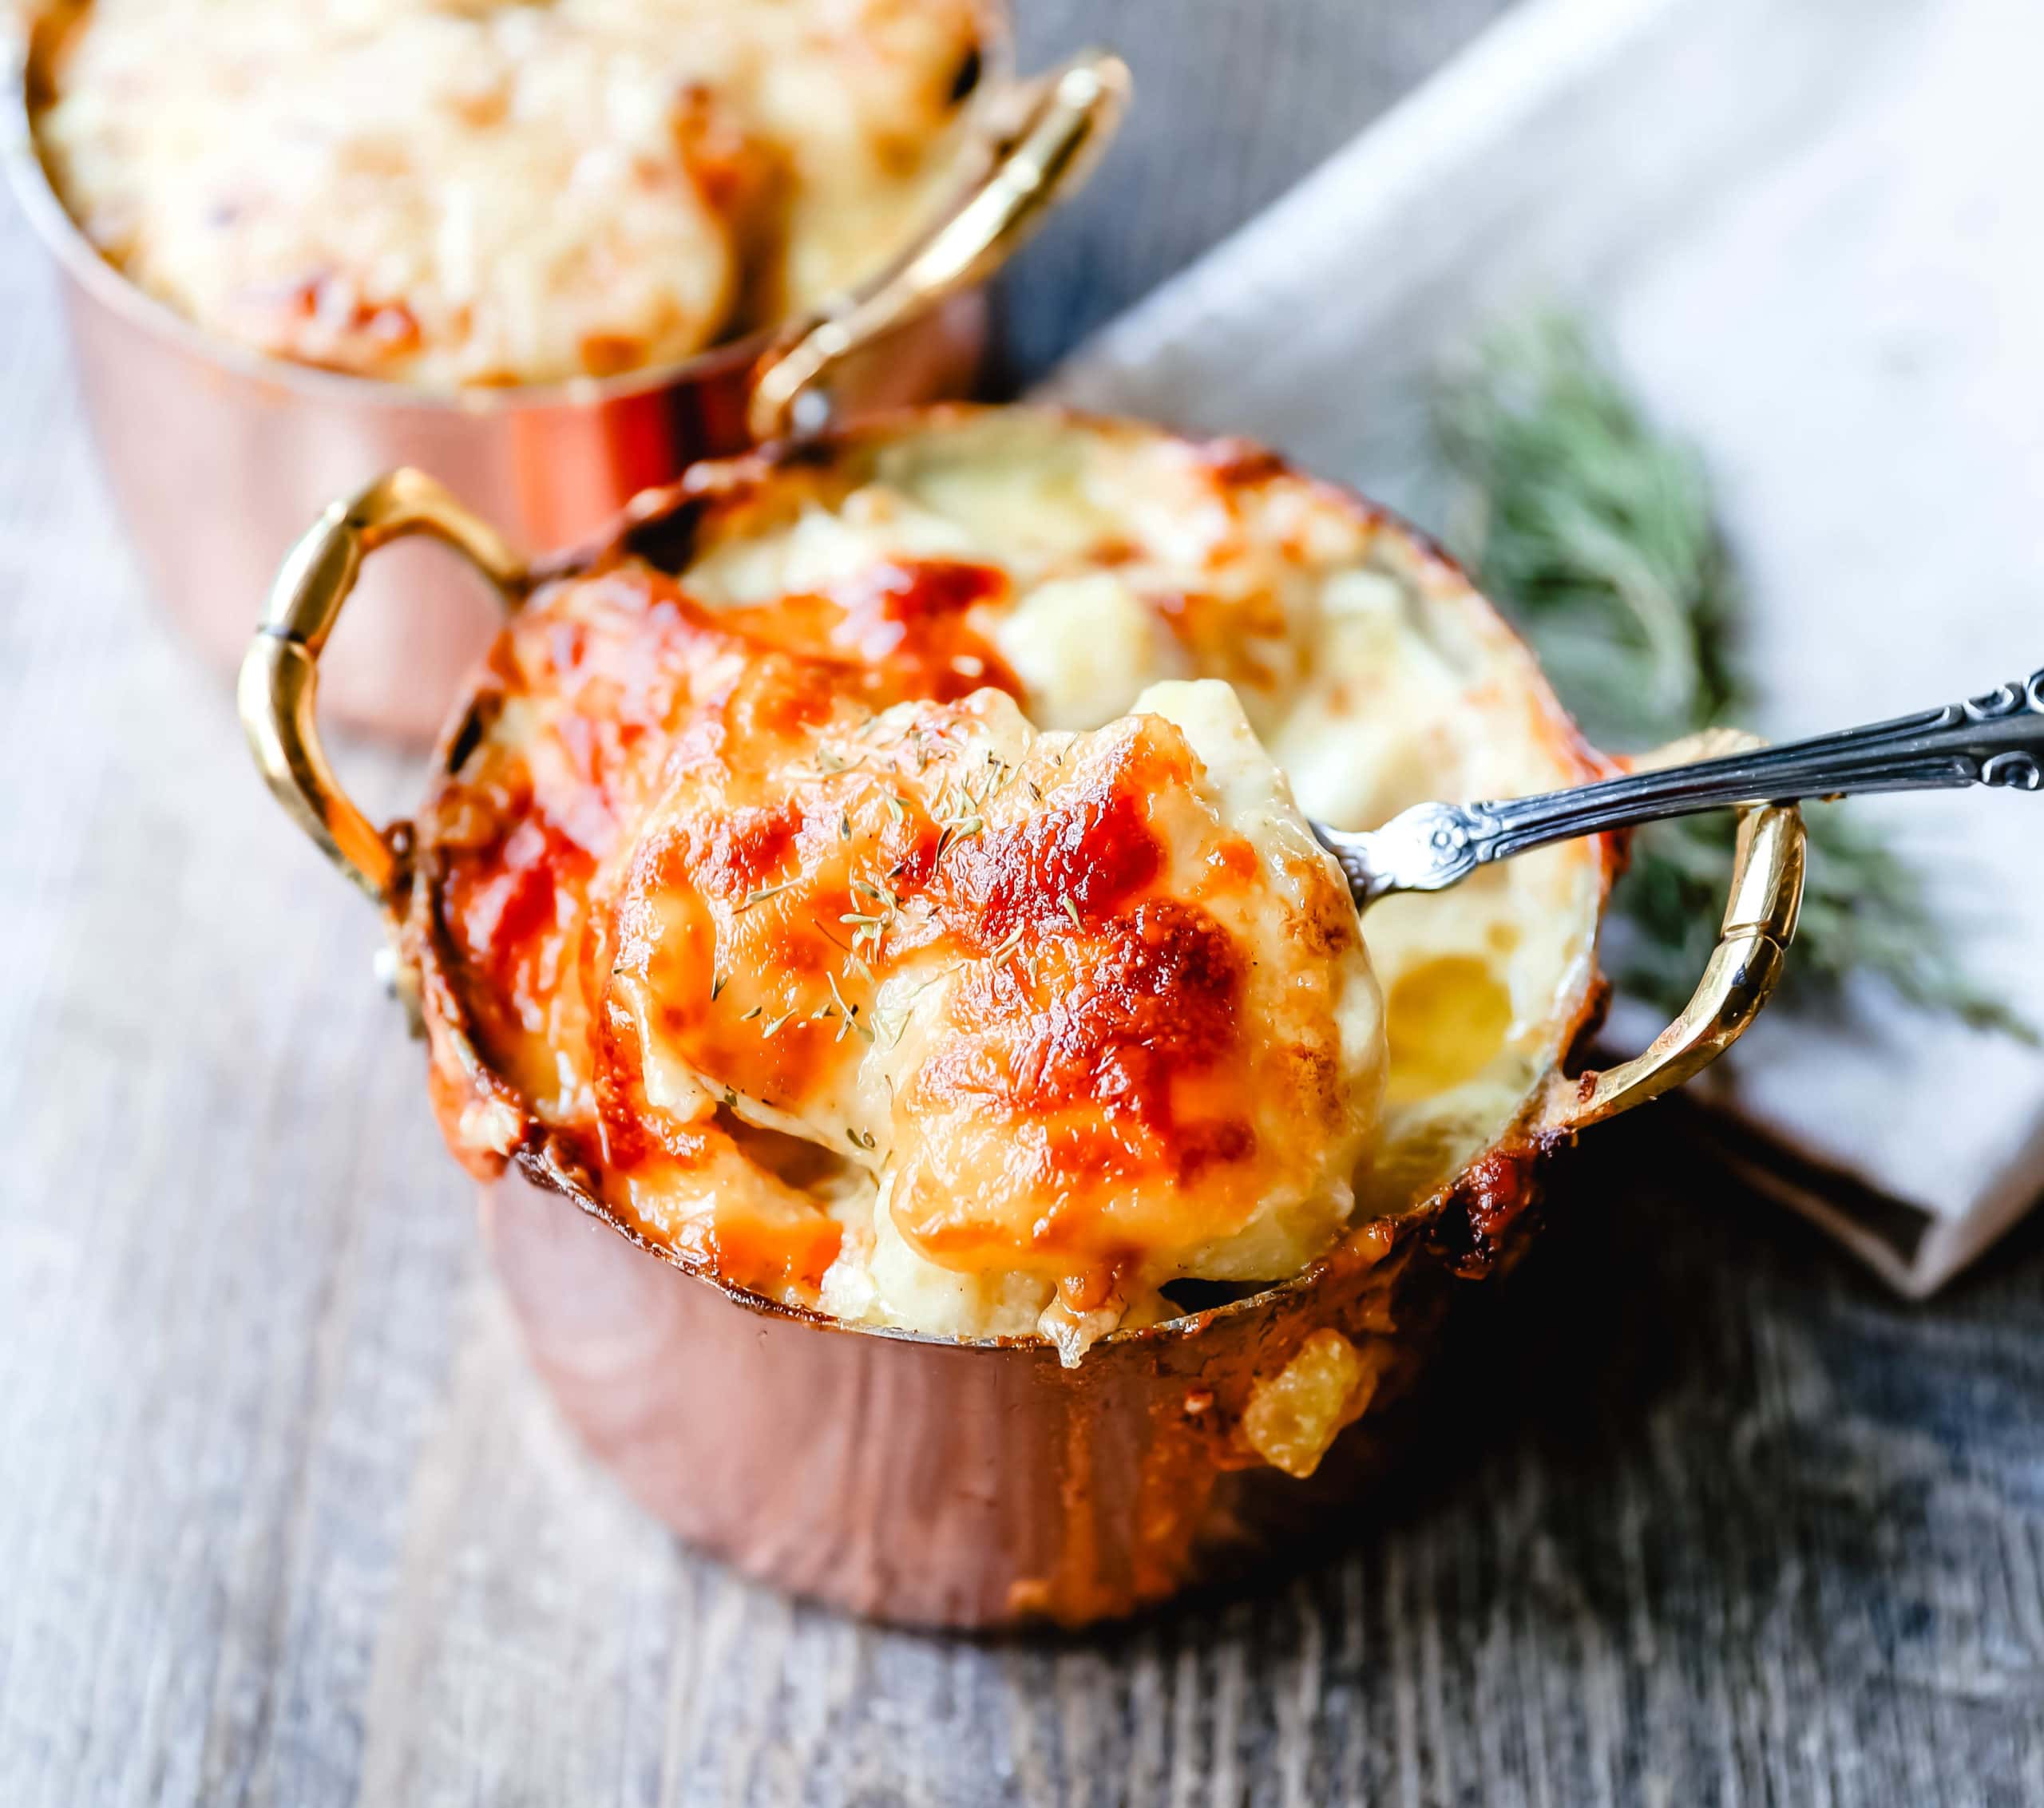 Cheesy Potatoes Au Gratin  Homemade cheesy scalloped potatoes with a rich cream sauce and melted cheddar cheese. The perfect potato side dish recipe! www.modernhoney.com #scallopedpotatoes #augratinpotatoes #cheesypotatoes #potatoesaugratin